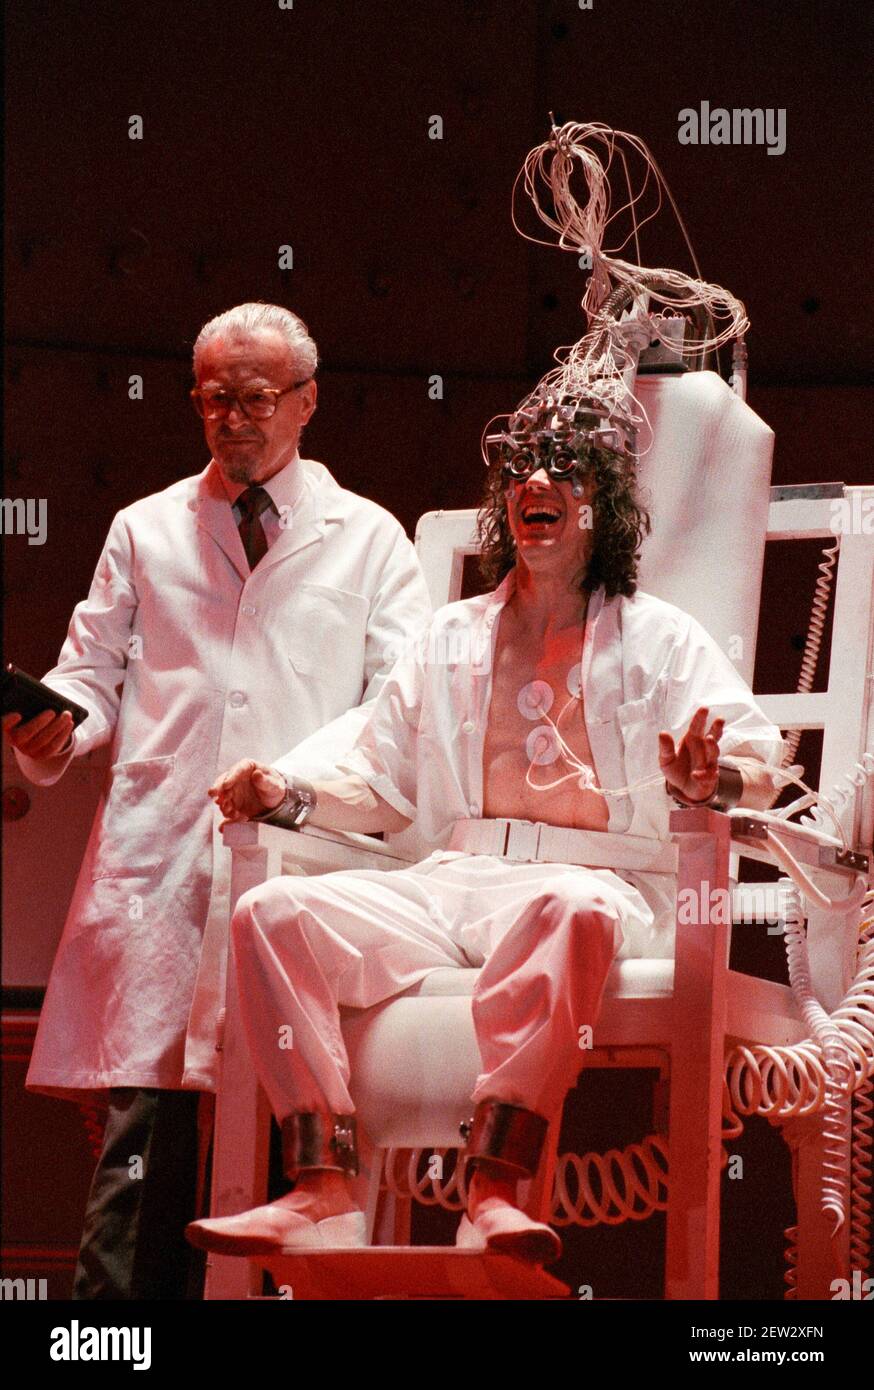 undergoing aversion therapy - l-r: Russell Enoch (Dr Brodsky), Phil Daniels (Alex) in A CLOCKWORK ORANGE 2004 at the Royalty Theatre, London WC2  26/05/1990  a Royal Shakespeare Company production  written by Anthony Burgess in collaboration with Ron Daniels  music by The Edge & Bono  design: Richard Hudson  lighting: David Hersey  choreography: Arlene Phillips  fights: Malcolm Ranson  director: Ron Daniels Stock Photo